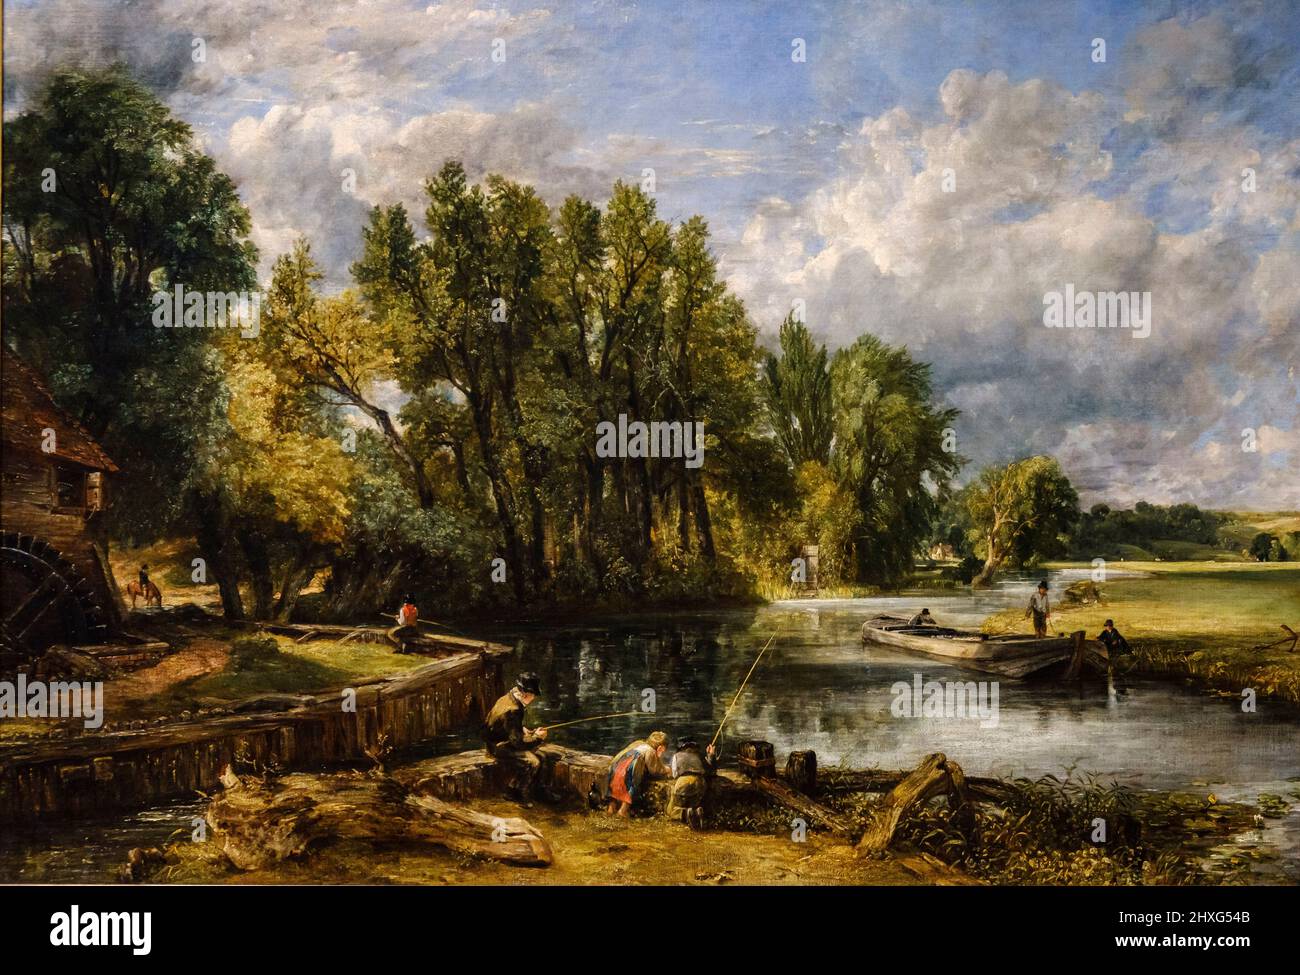 John Constable, Stratford Mill, 1820, huile sur toile, National Gallery, Londres, Angleterre, Grande-Bretagne. Banque D'Images